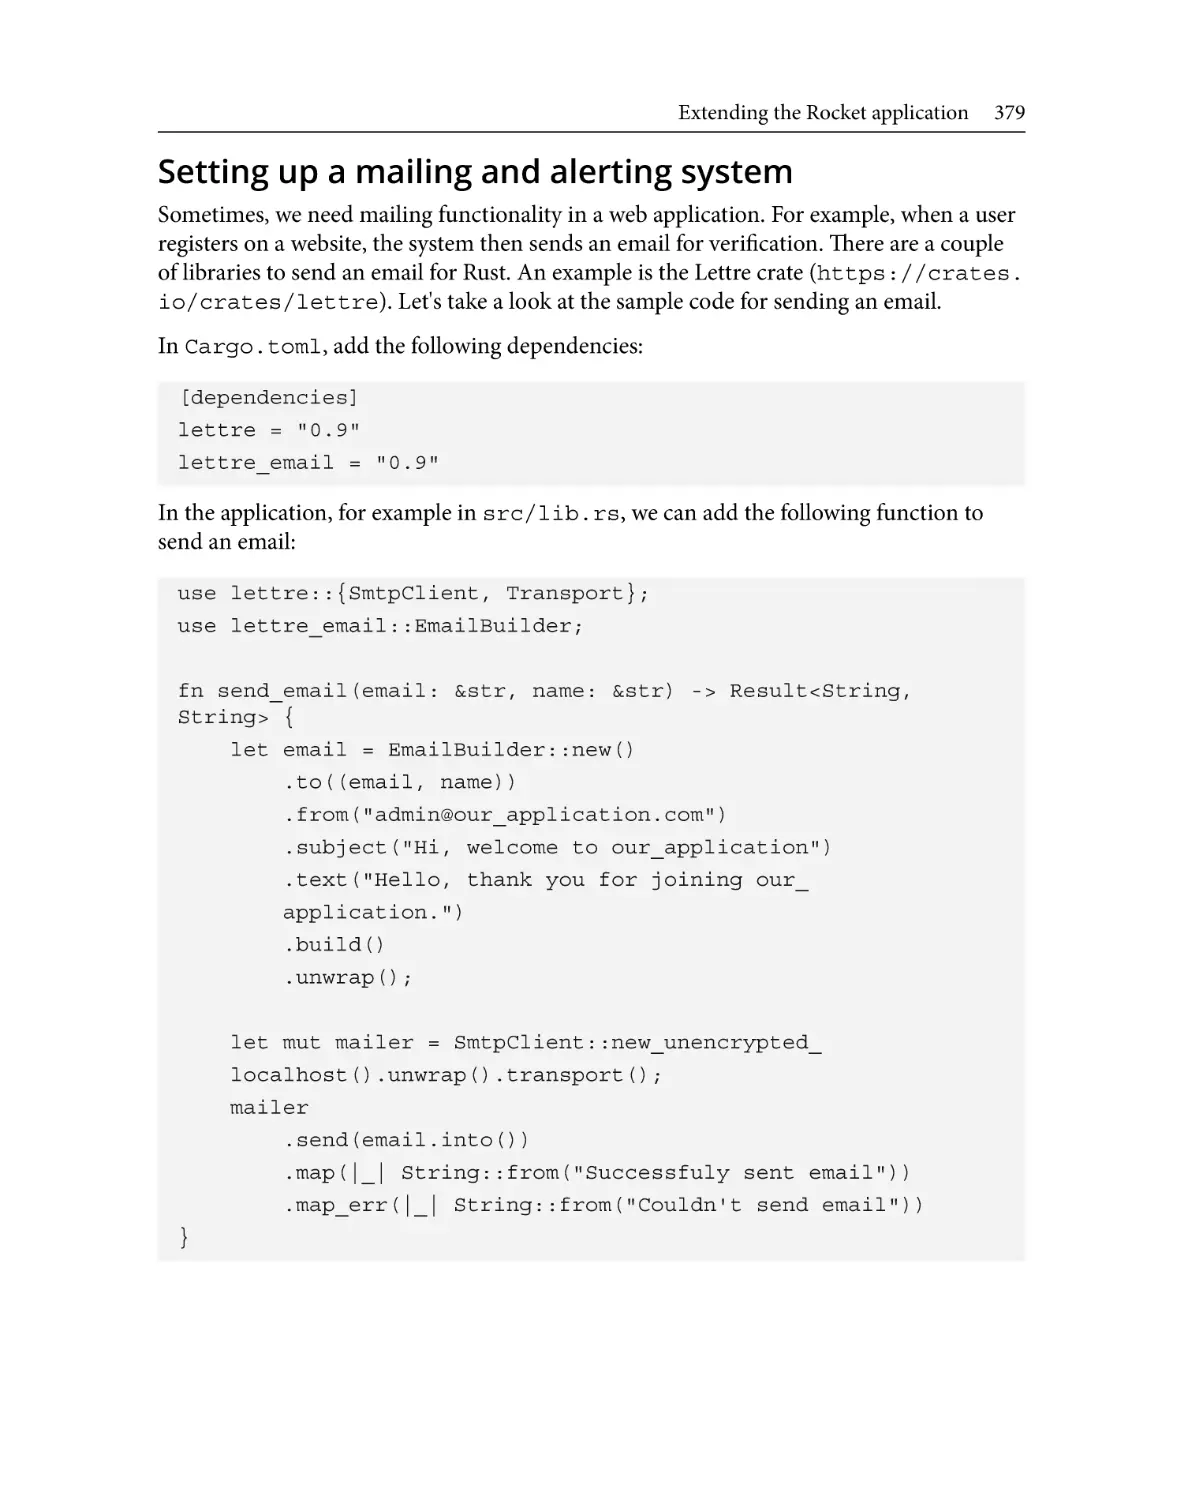 Setting up a mailing and alerting system